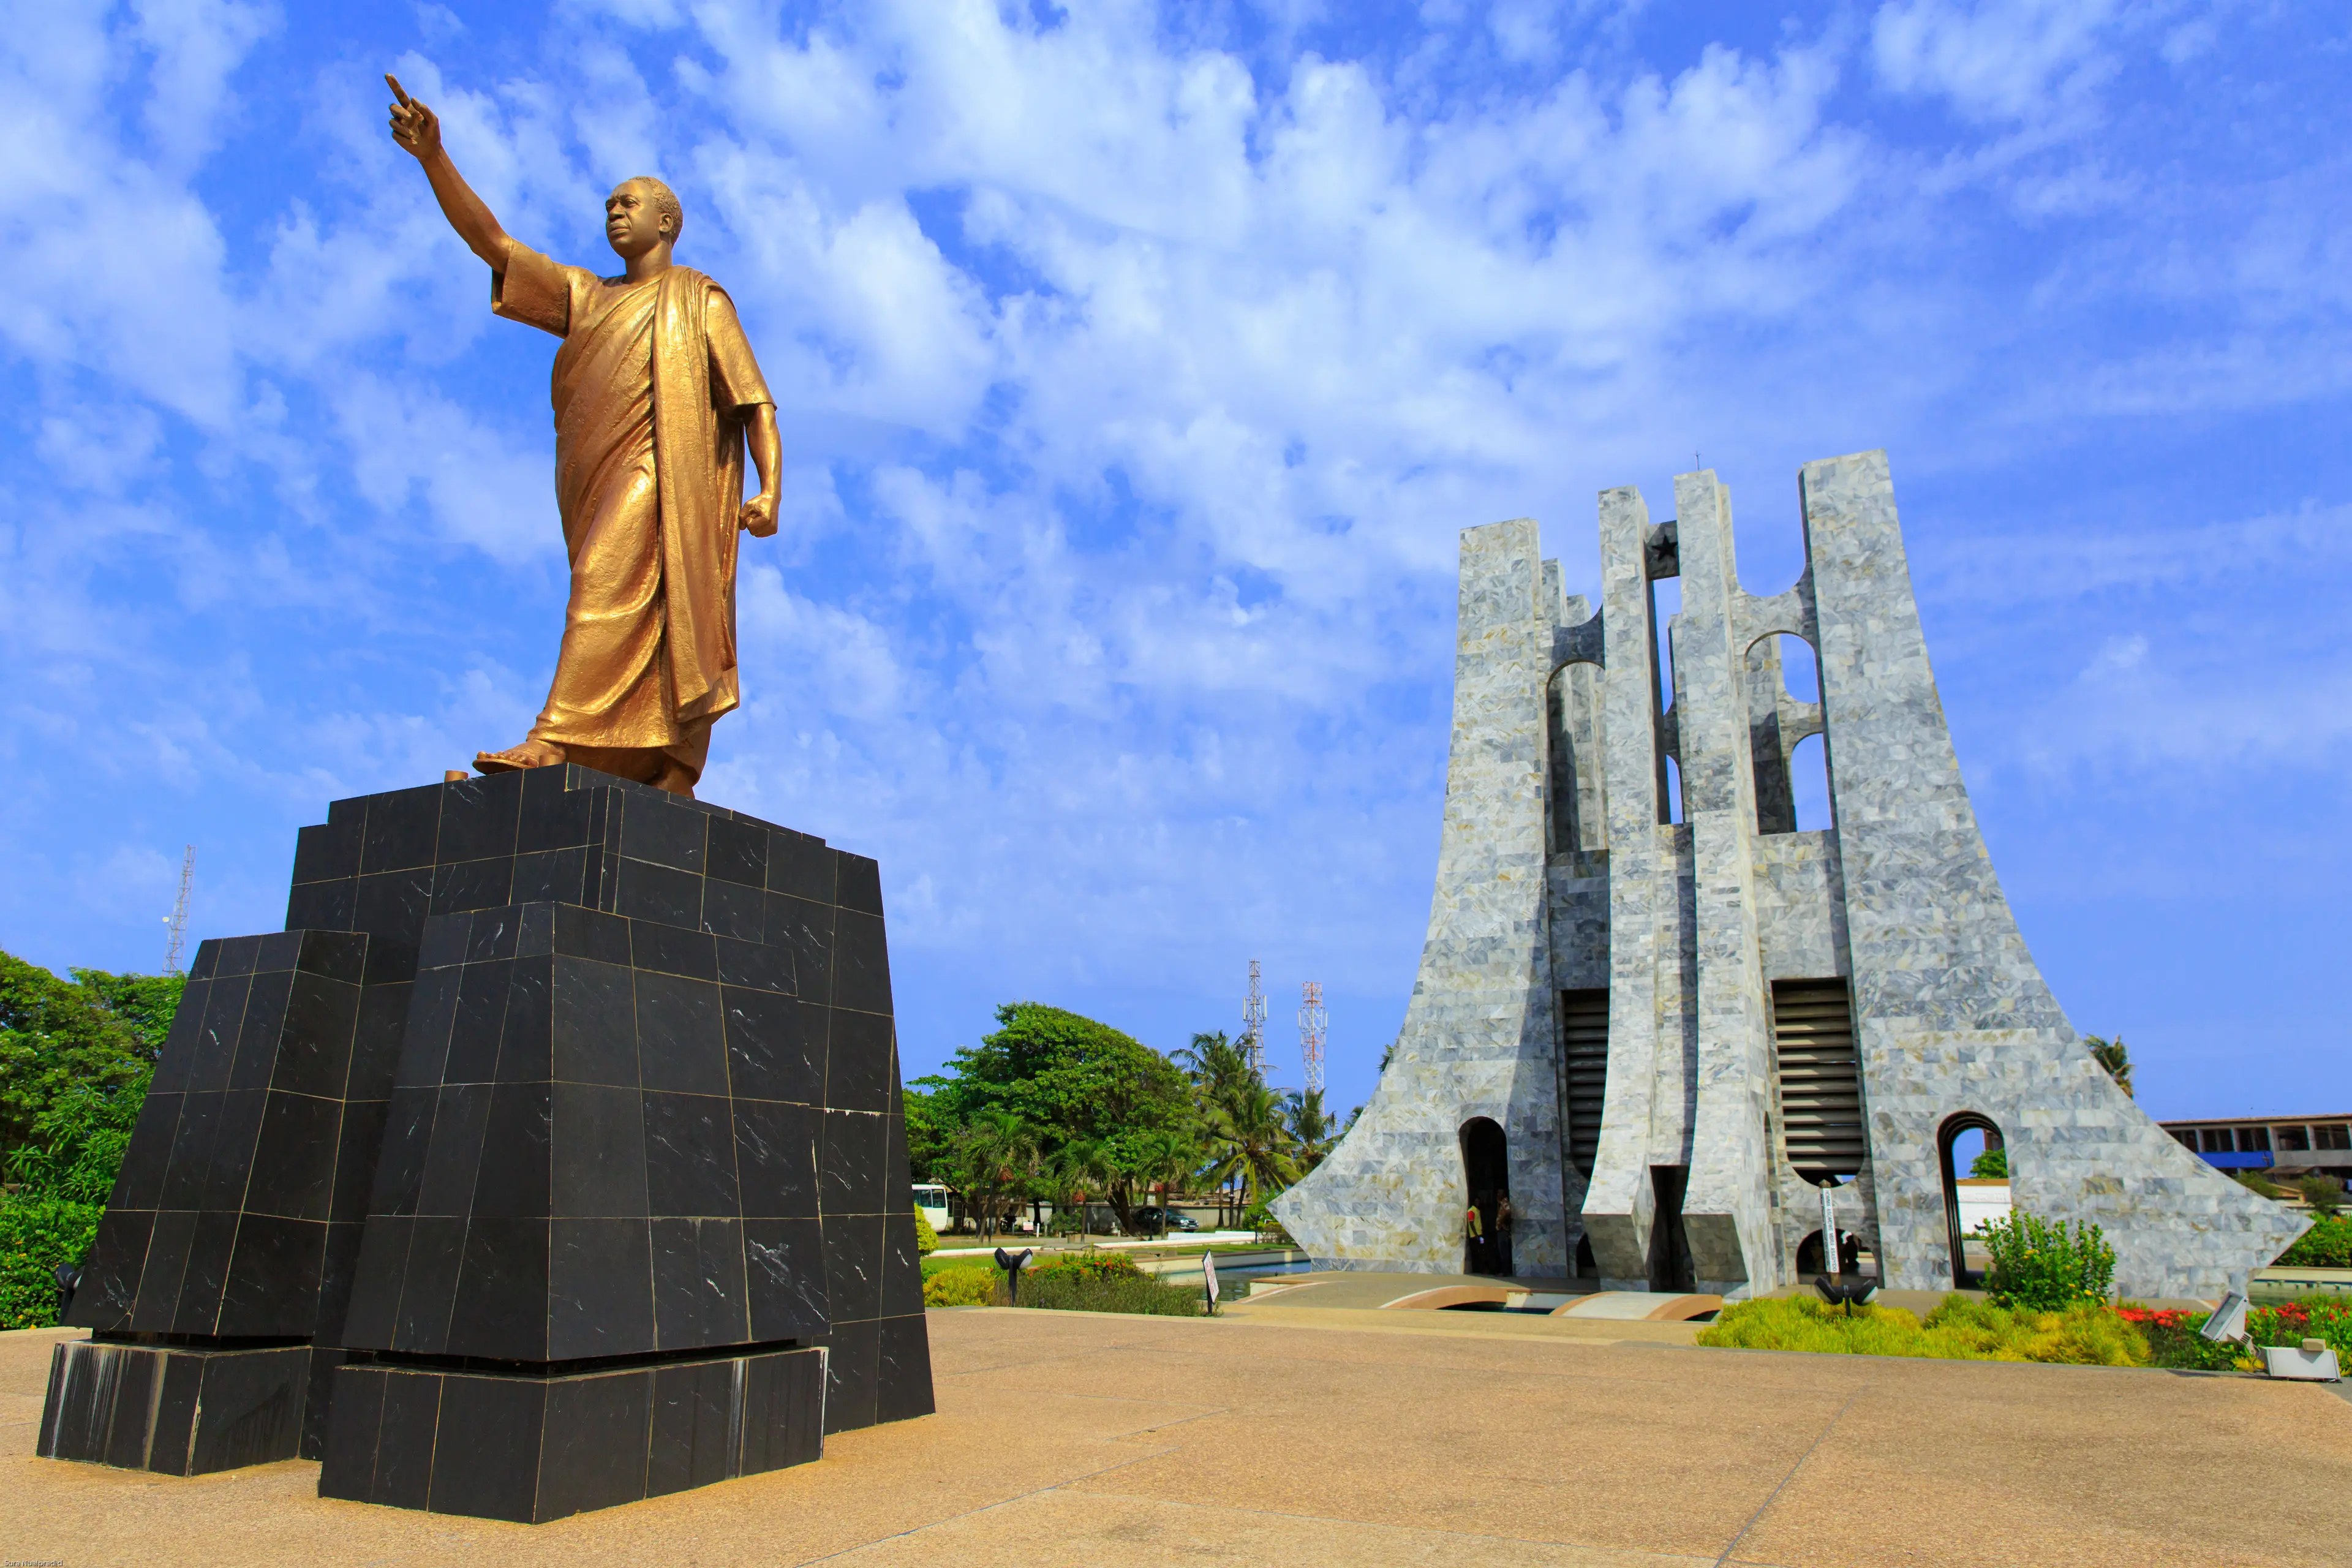 3-Day Adventure & Sightseeing Offbeat Guide to Accra, Ghana